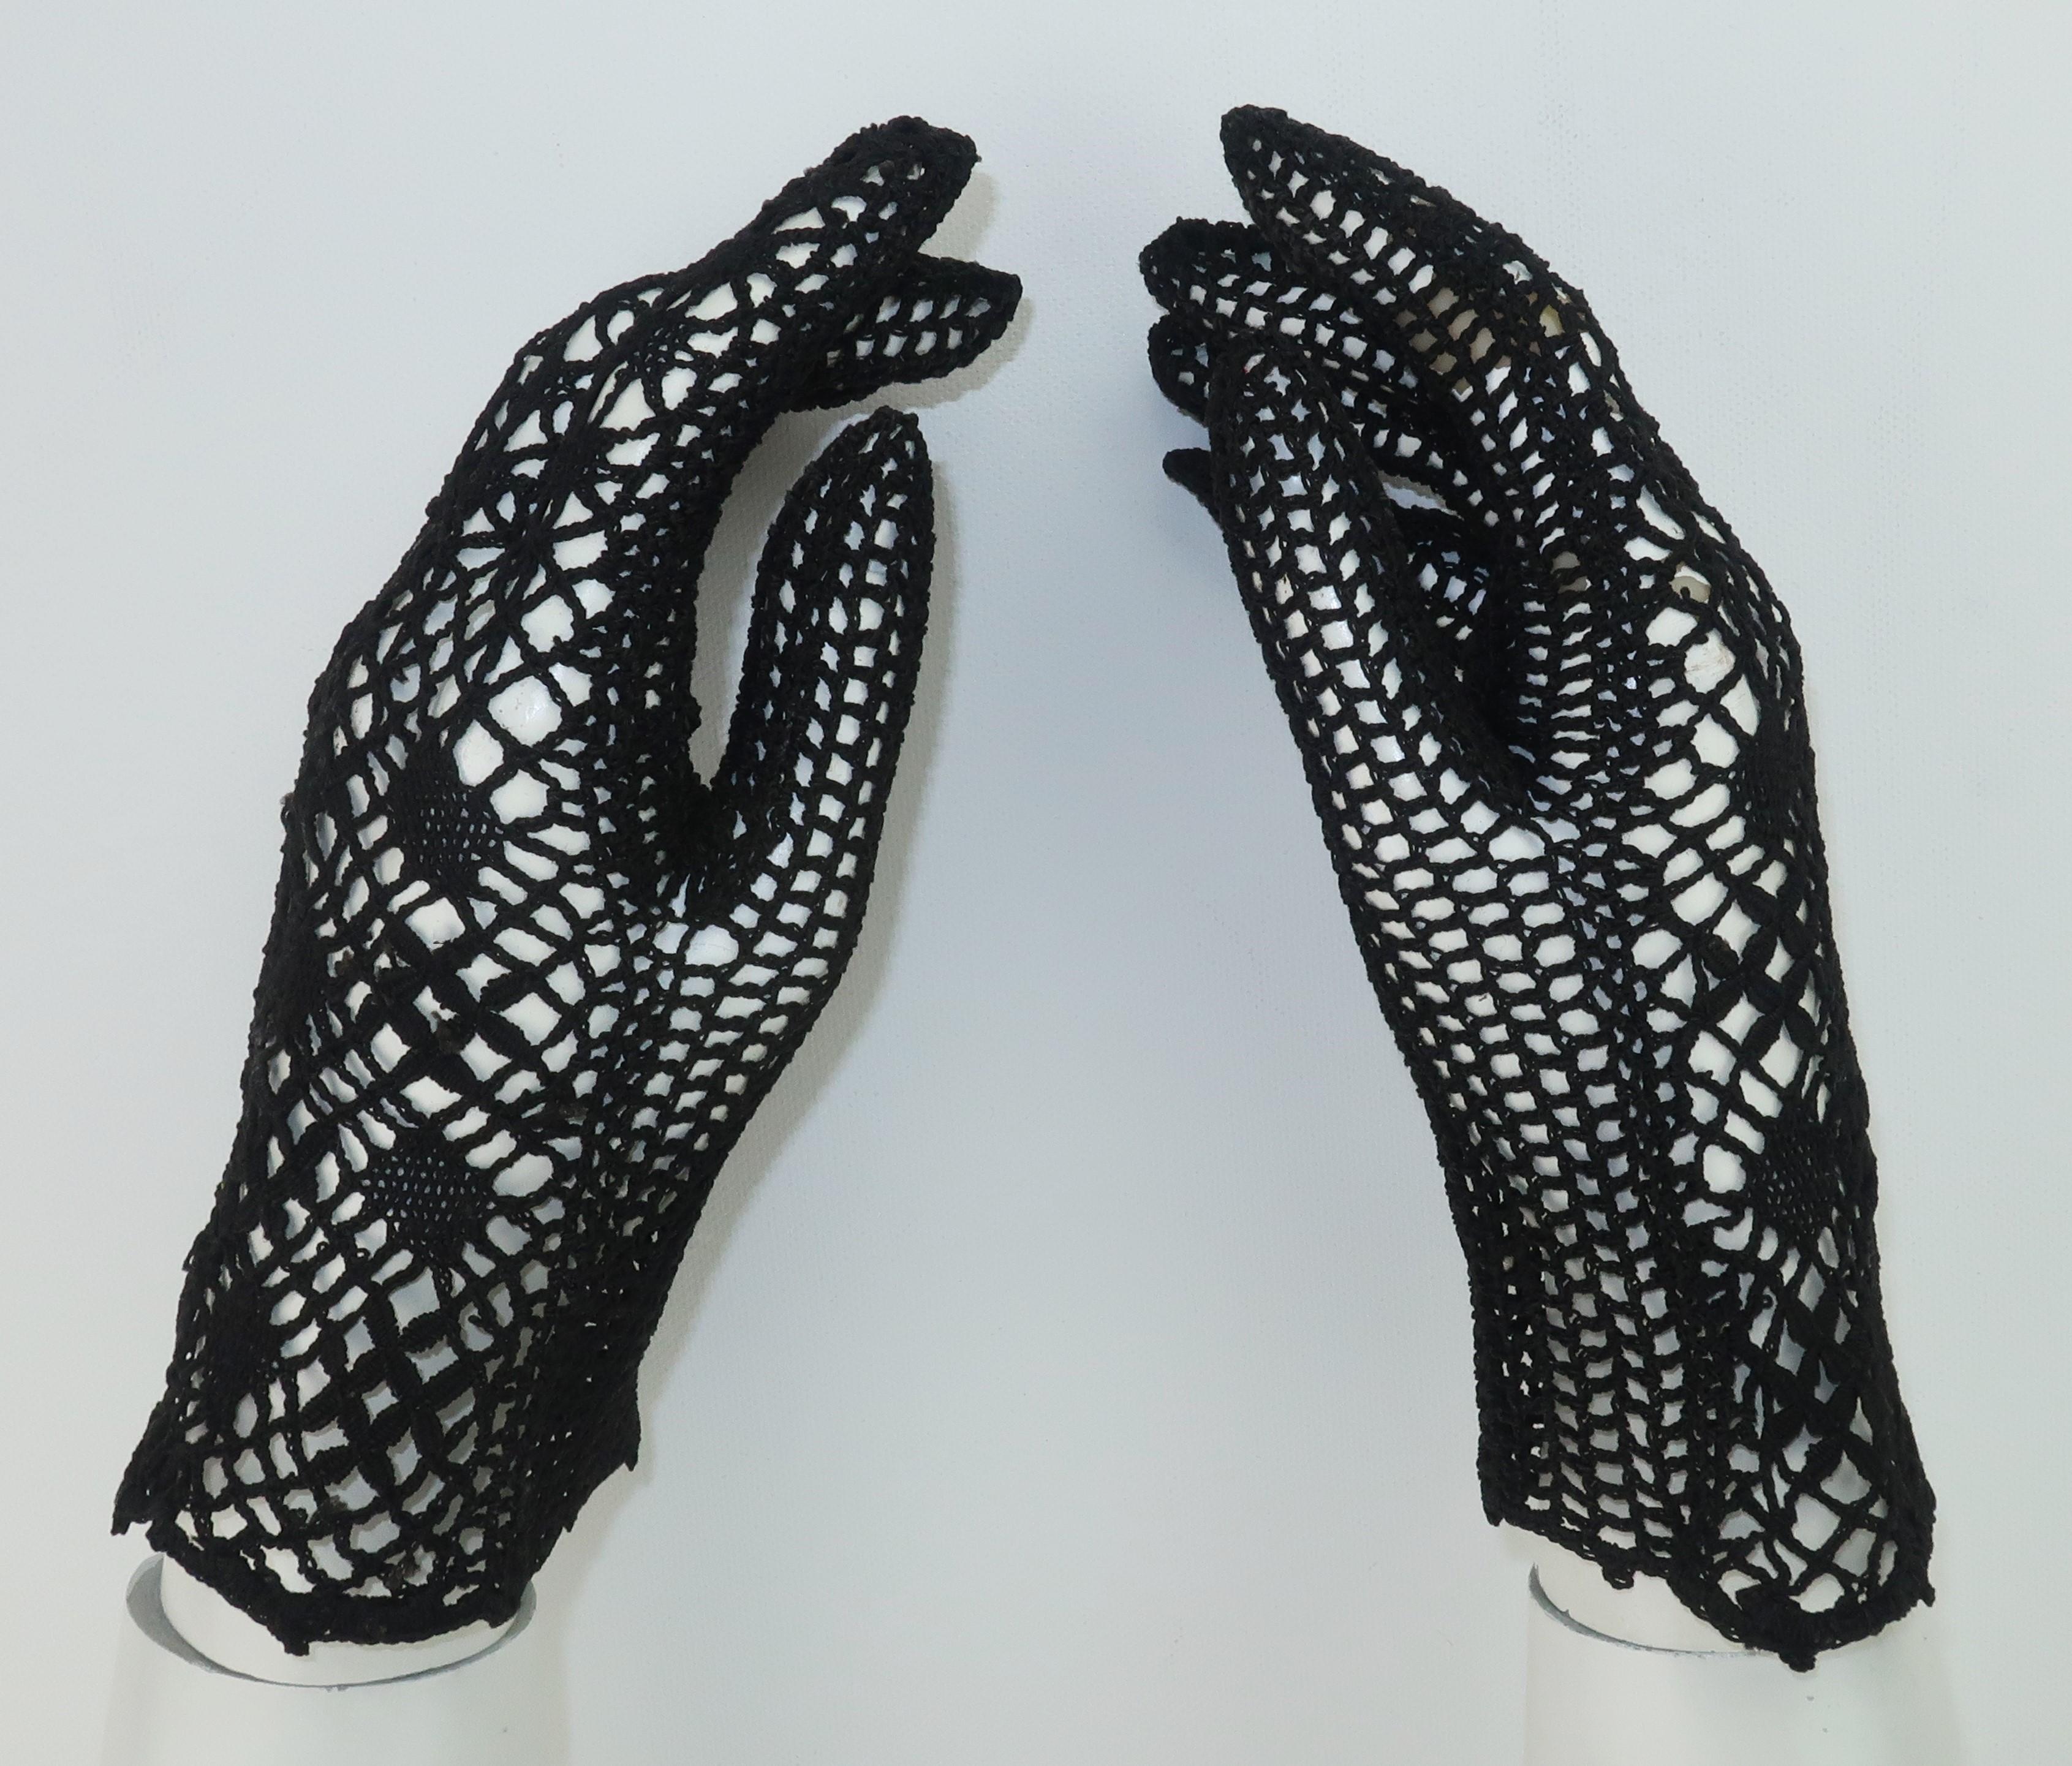 Add a vintage touch to day or evening attire with these black crochet net gloves.  The fine threading appears to be a silk and cotton blend and though unmarked they best fit a size 7.  Beautiful condition and appear rarely, if ever, worn.